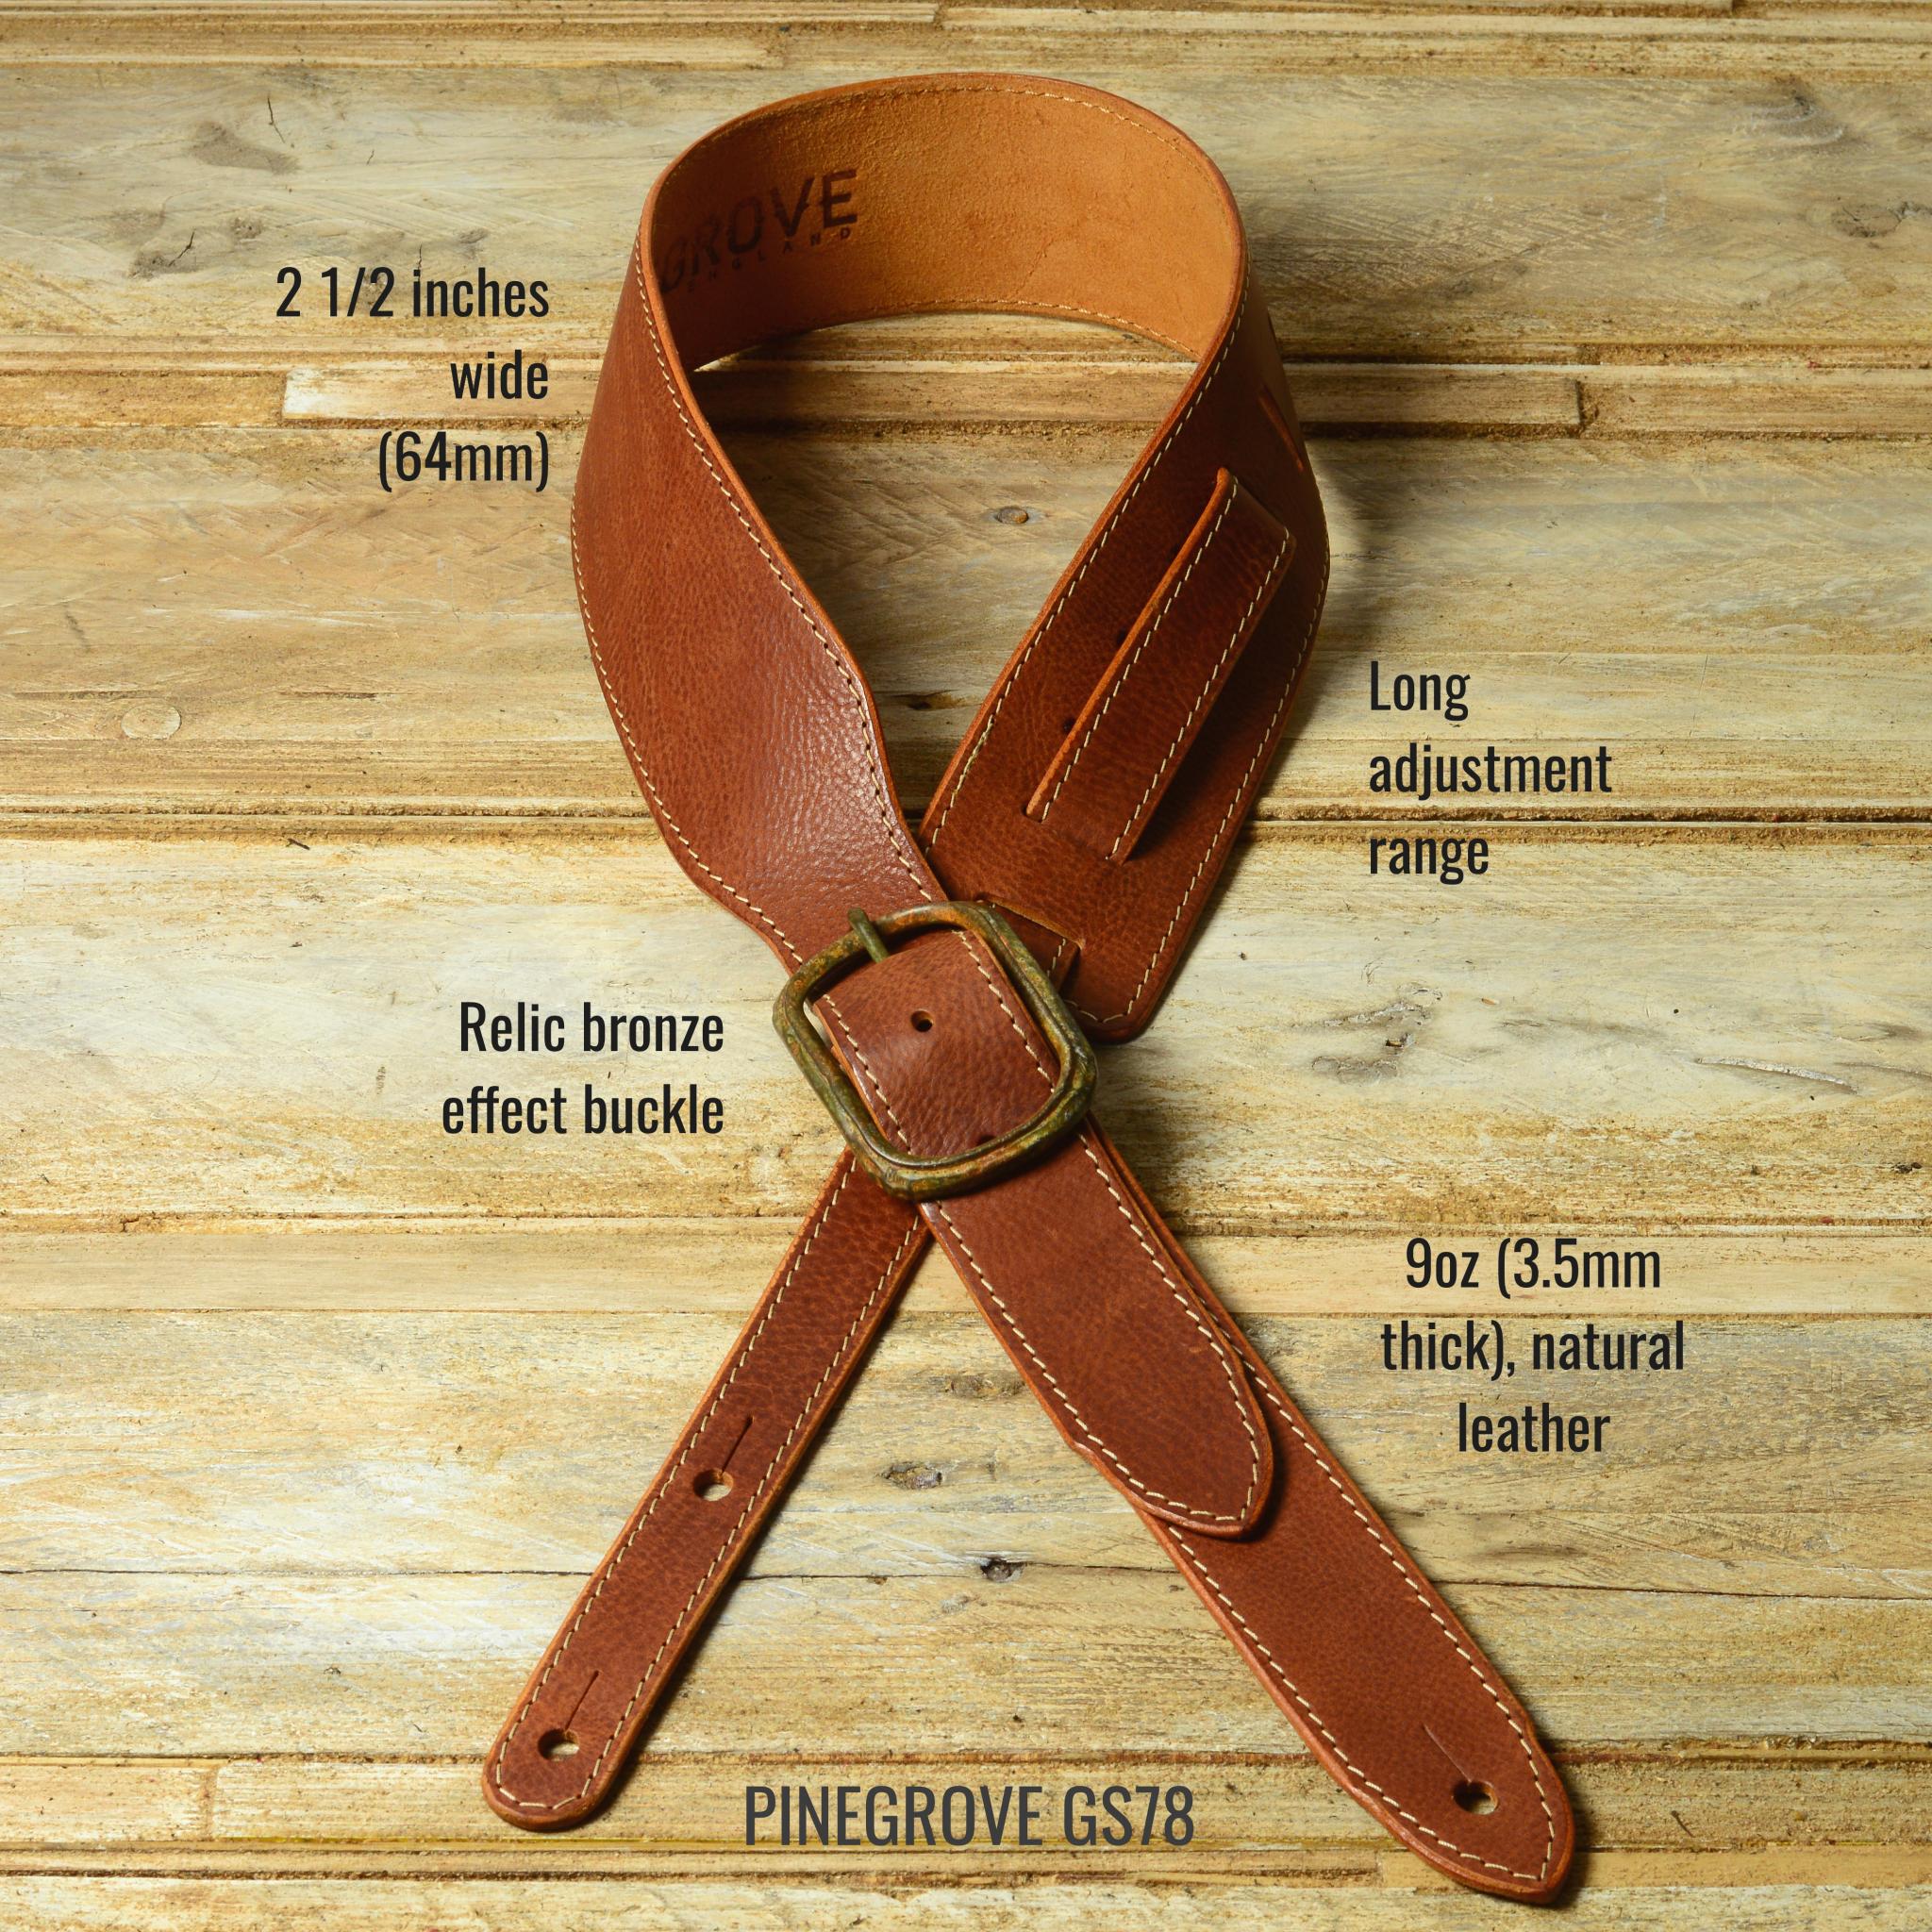 Buy Handmade Custom Leather Guitar Strap, made to order from